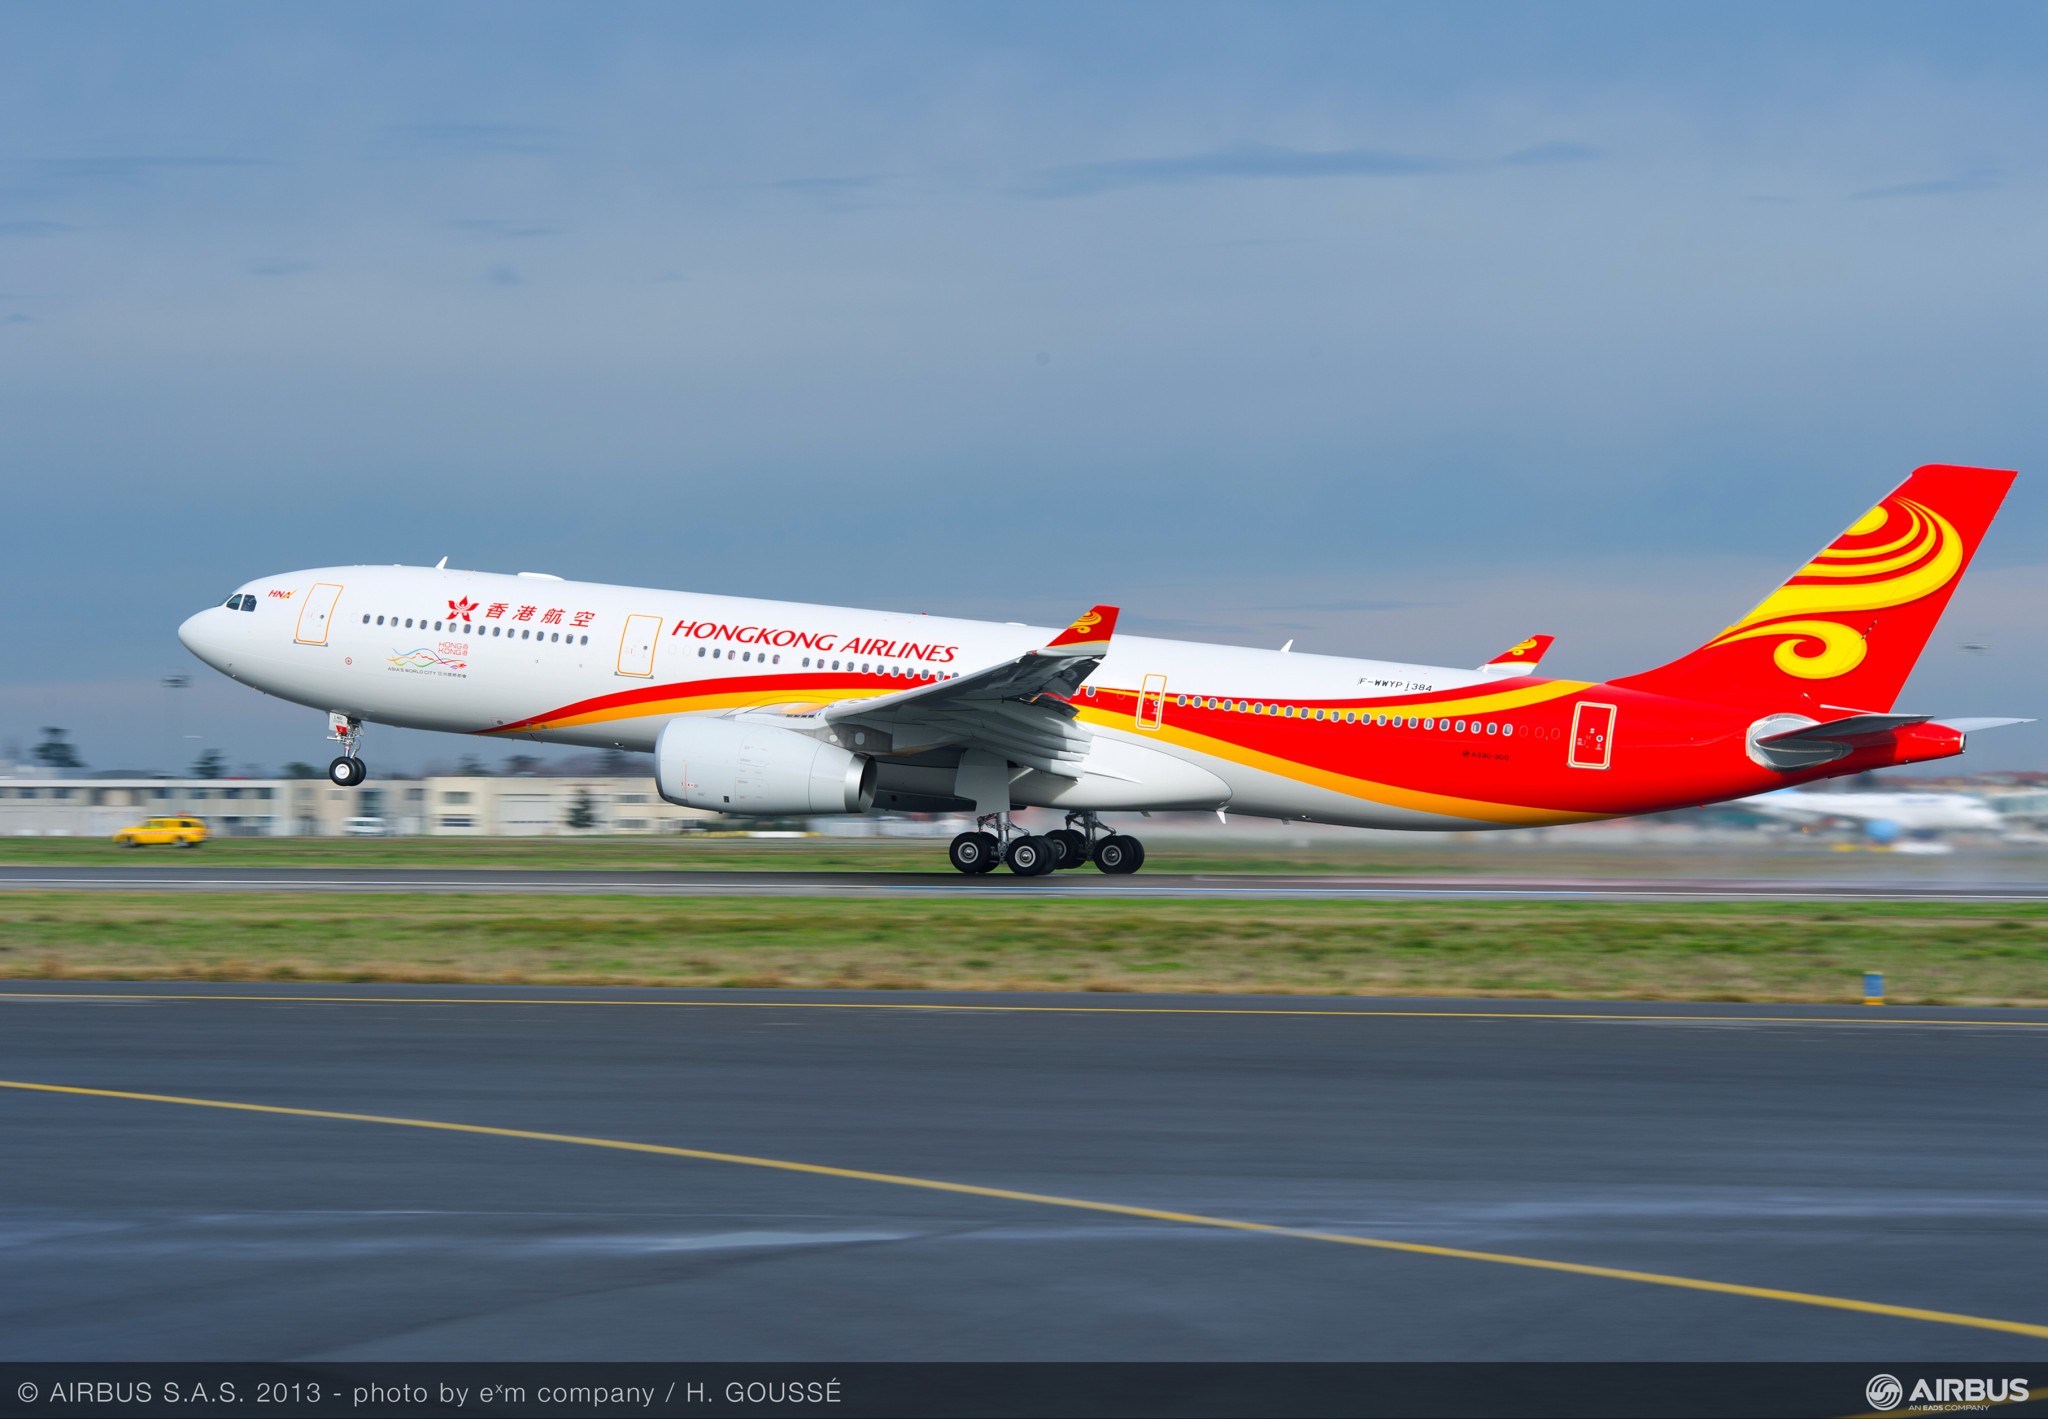 Hong Kong Airlines plans to recruit 1,000 employees in 2023